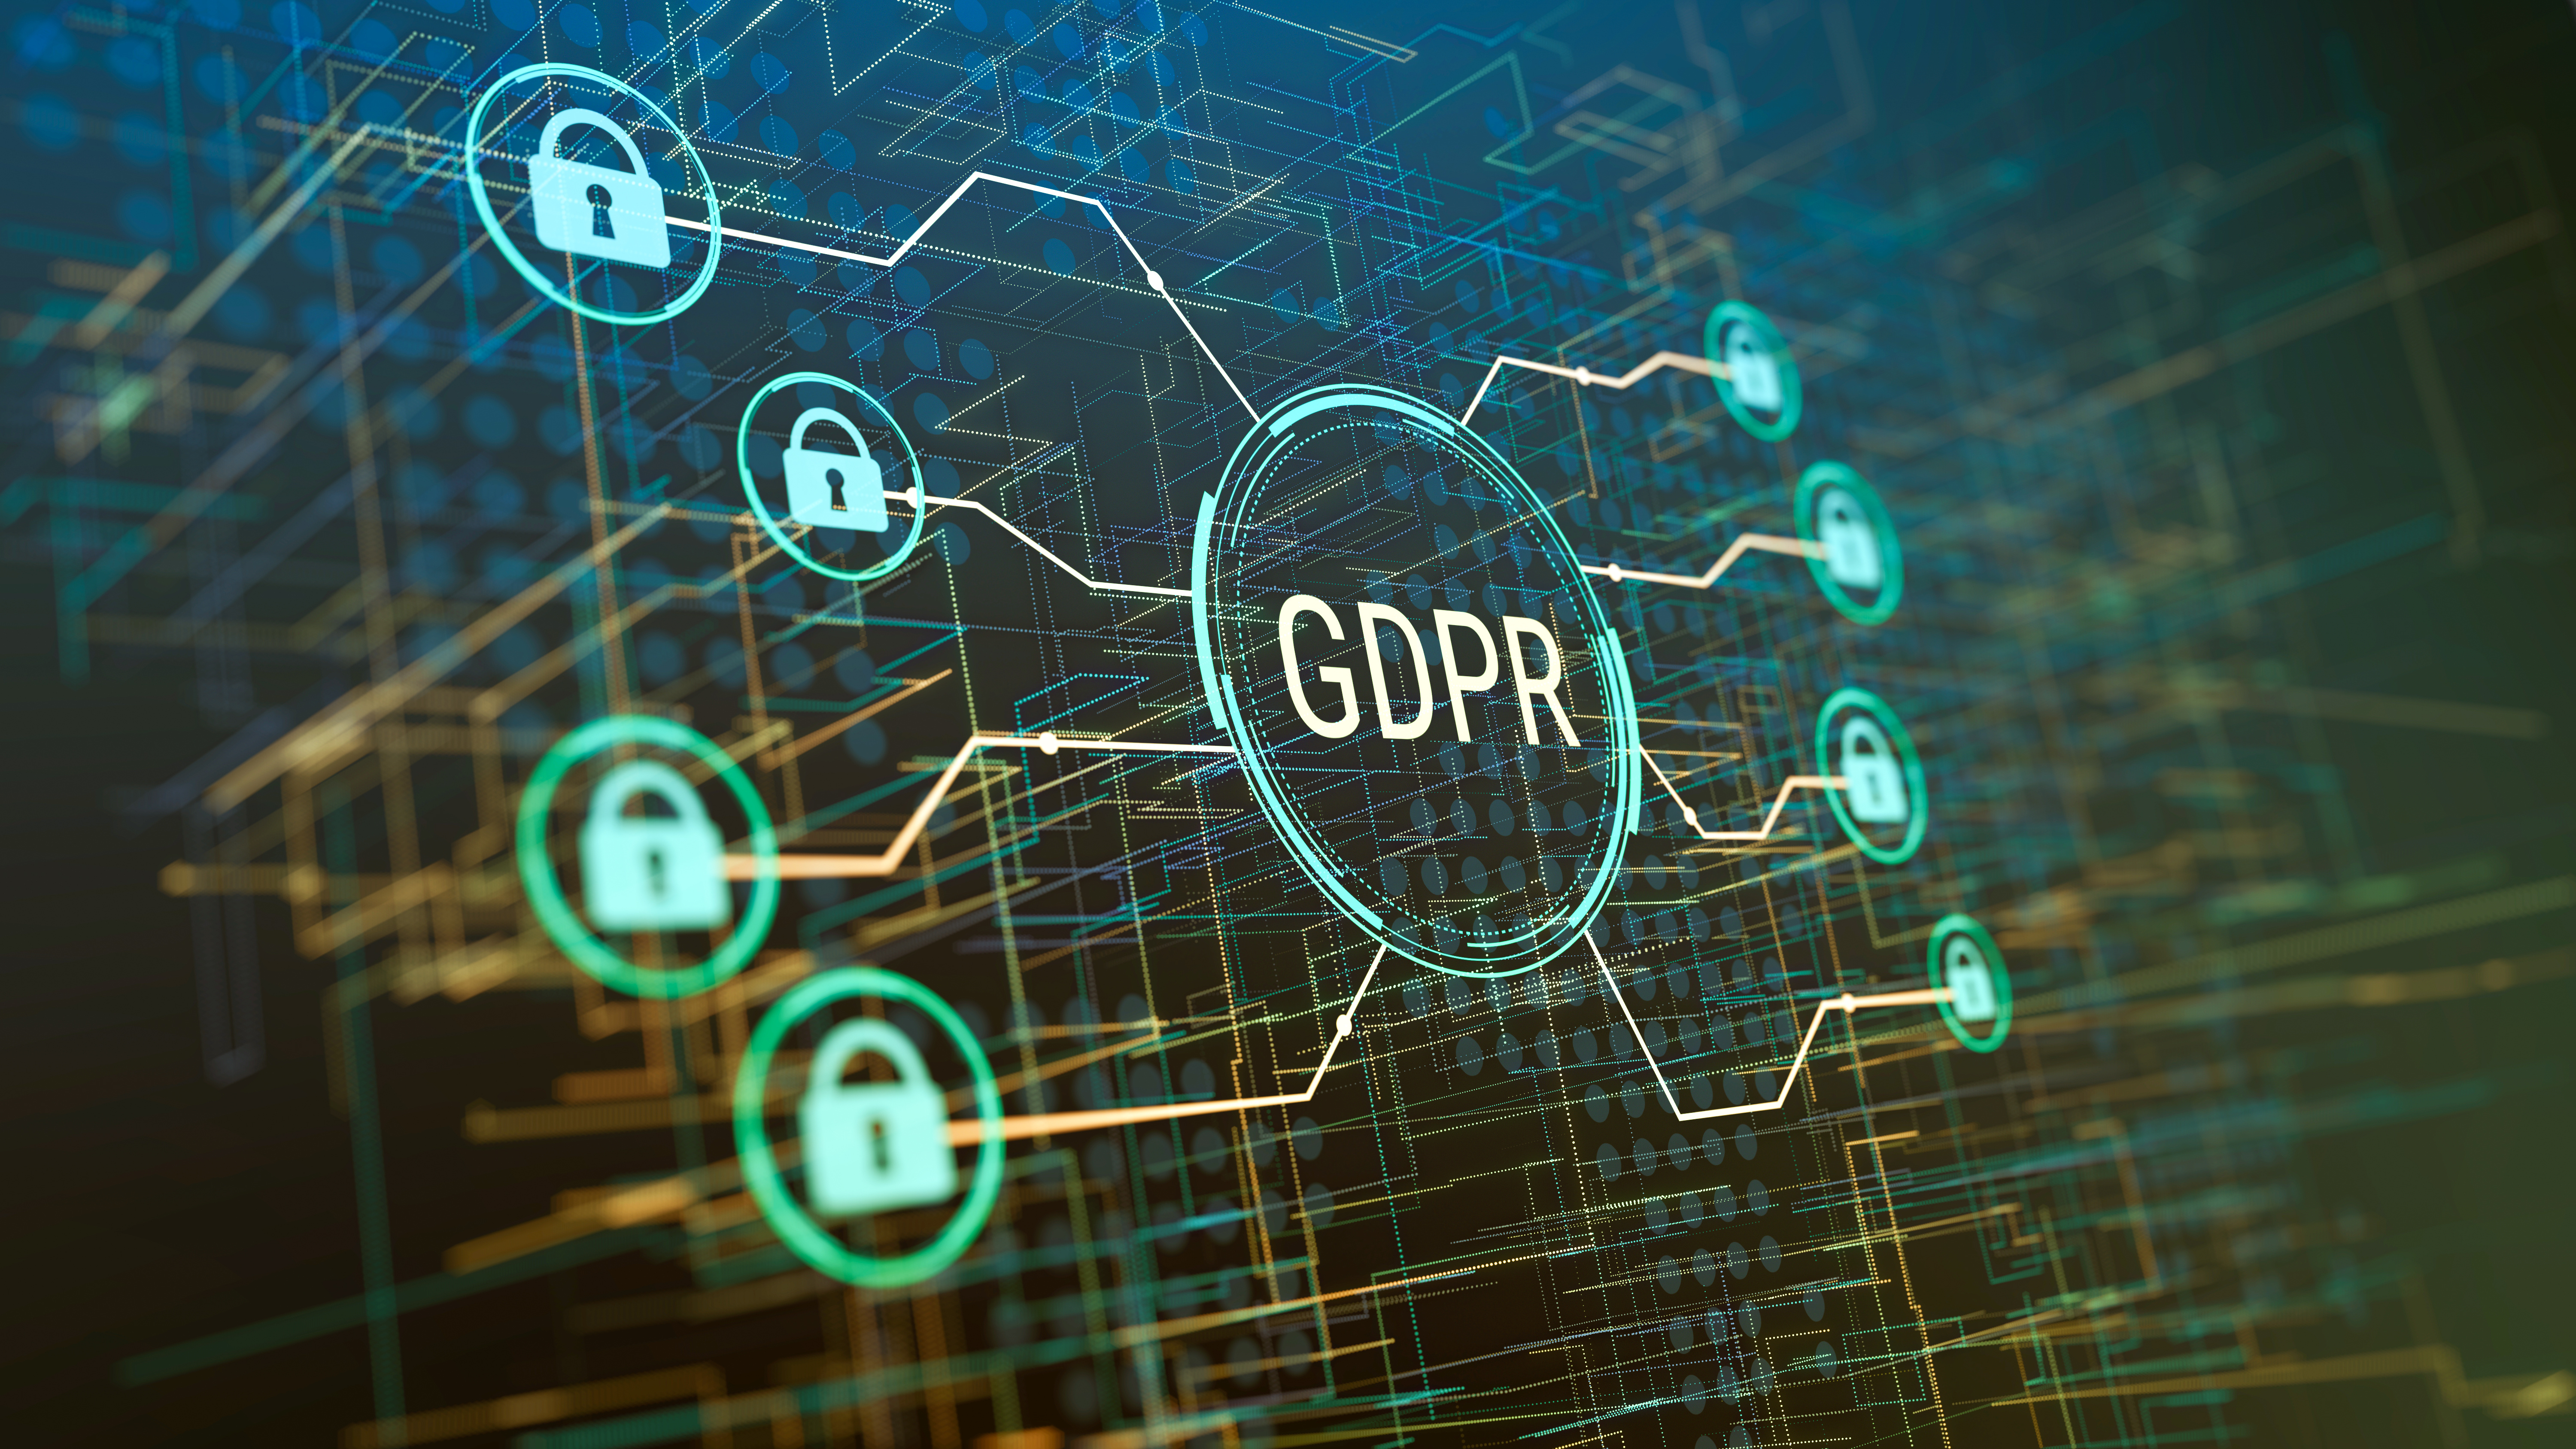 GDPR: Is your business ready for General Data Protection Regulation?